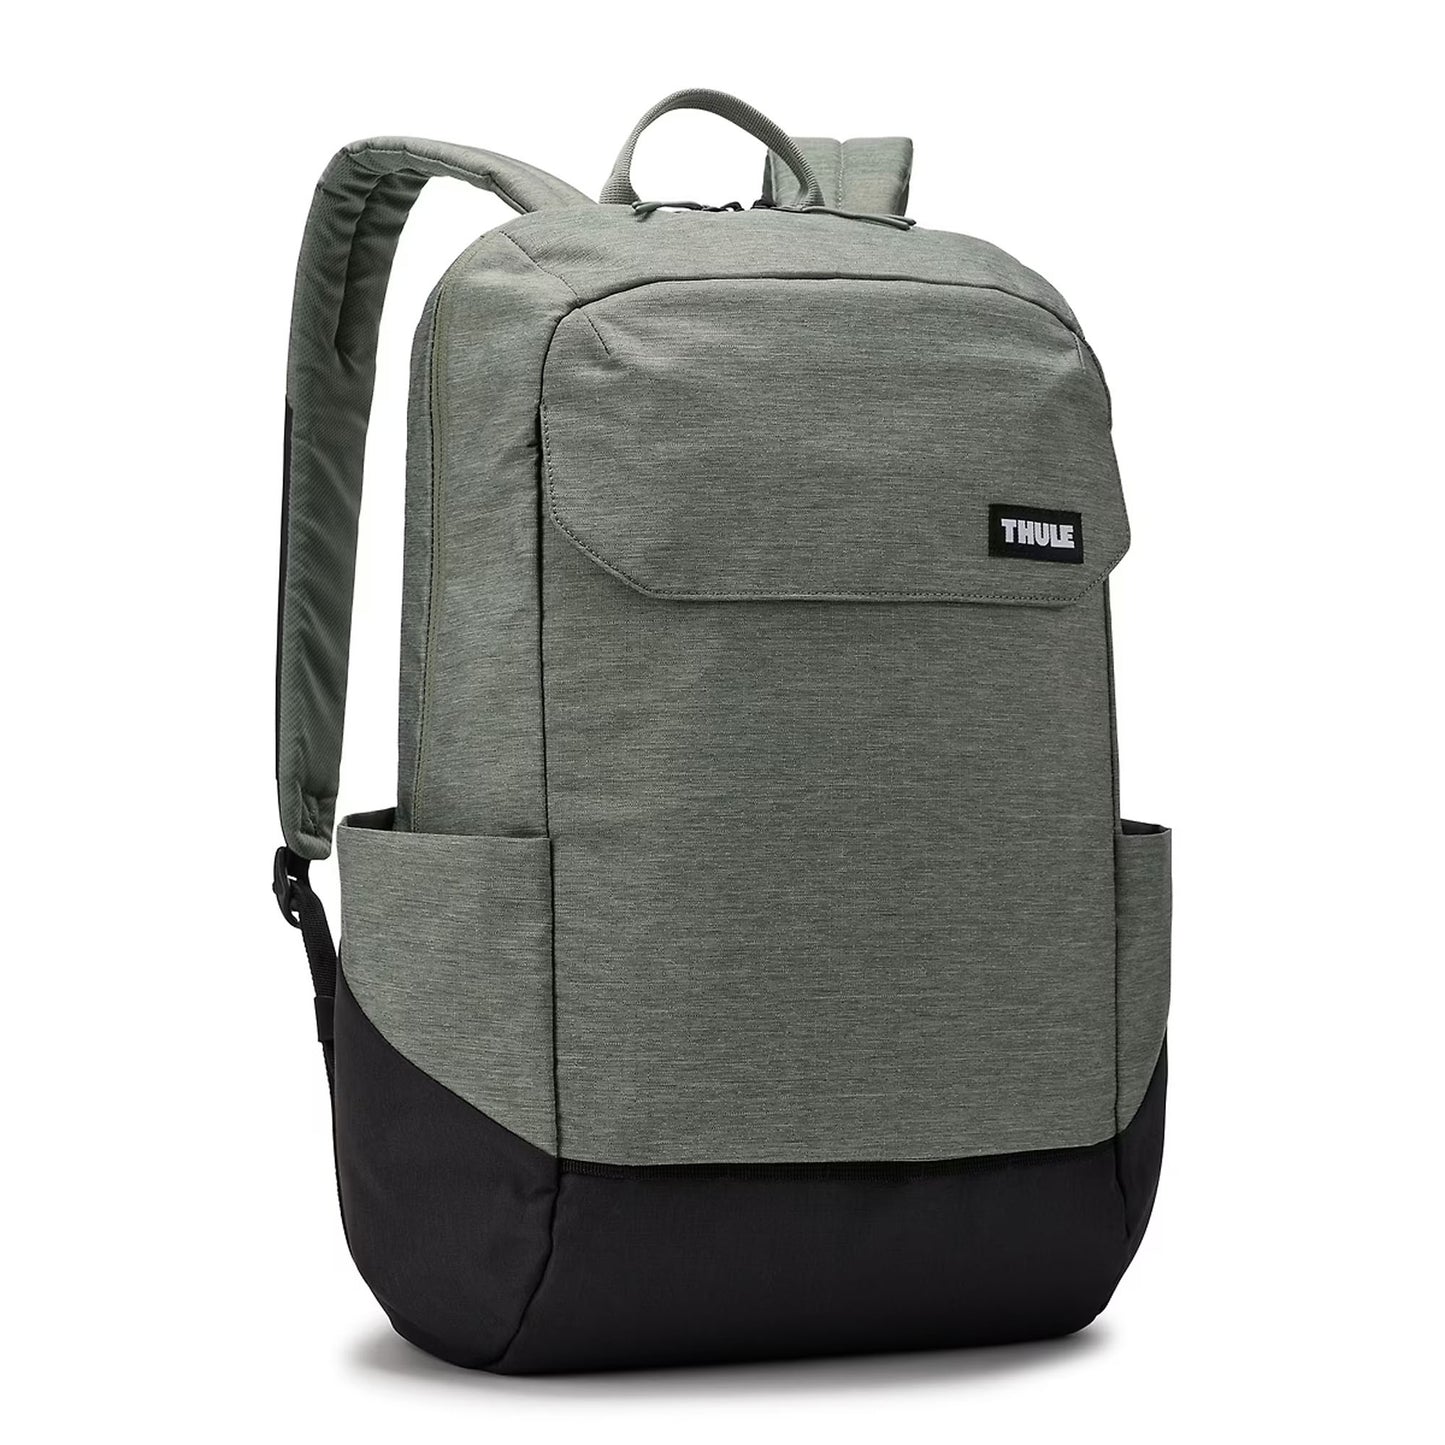 Thule Lithos Backpack 20L - Fit up to 15.6" Laptop or 16" MacBook - Agave Green-Black (Barcode: 0085854253383 )